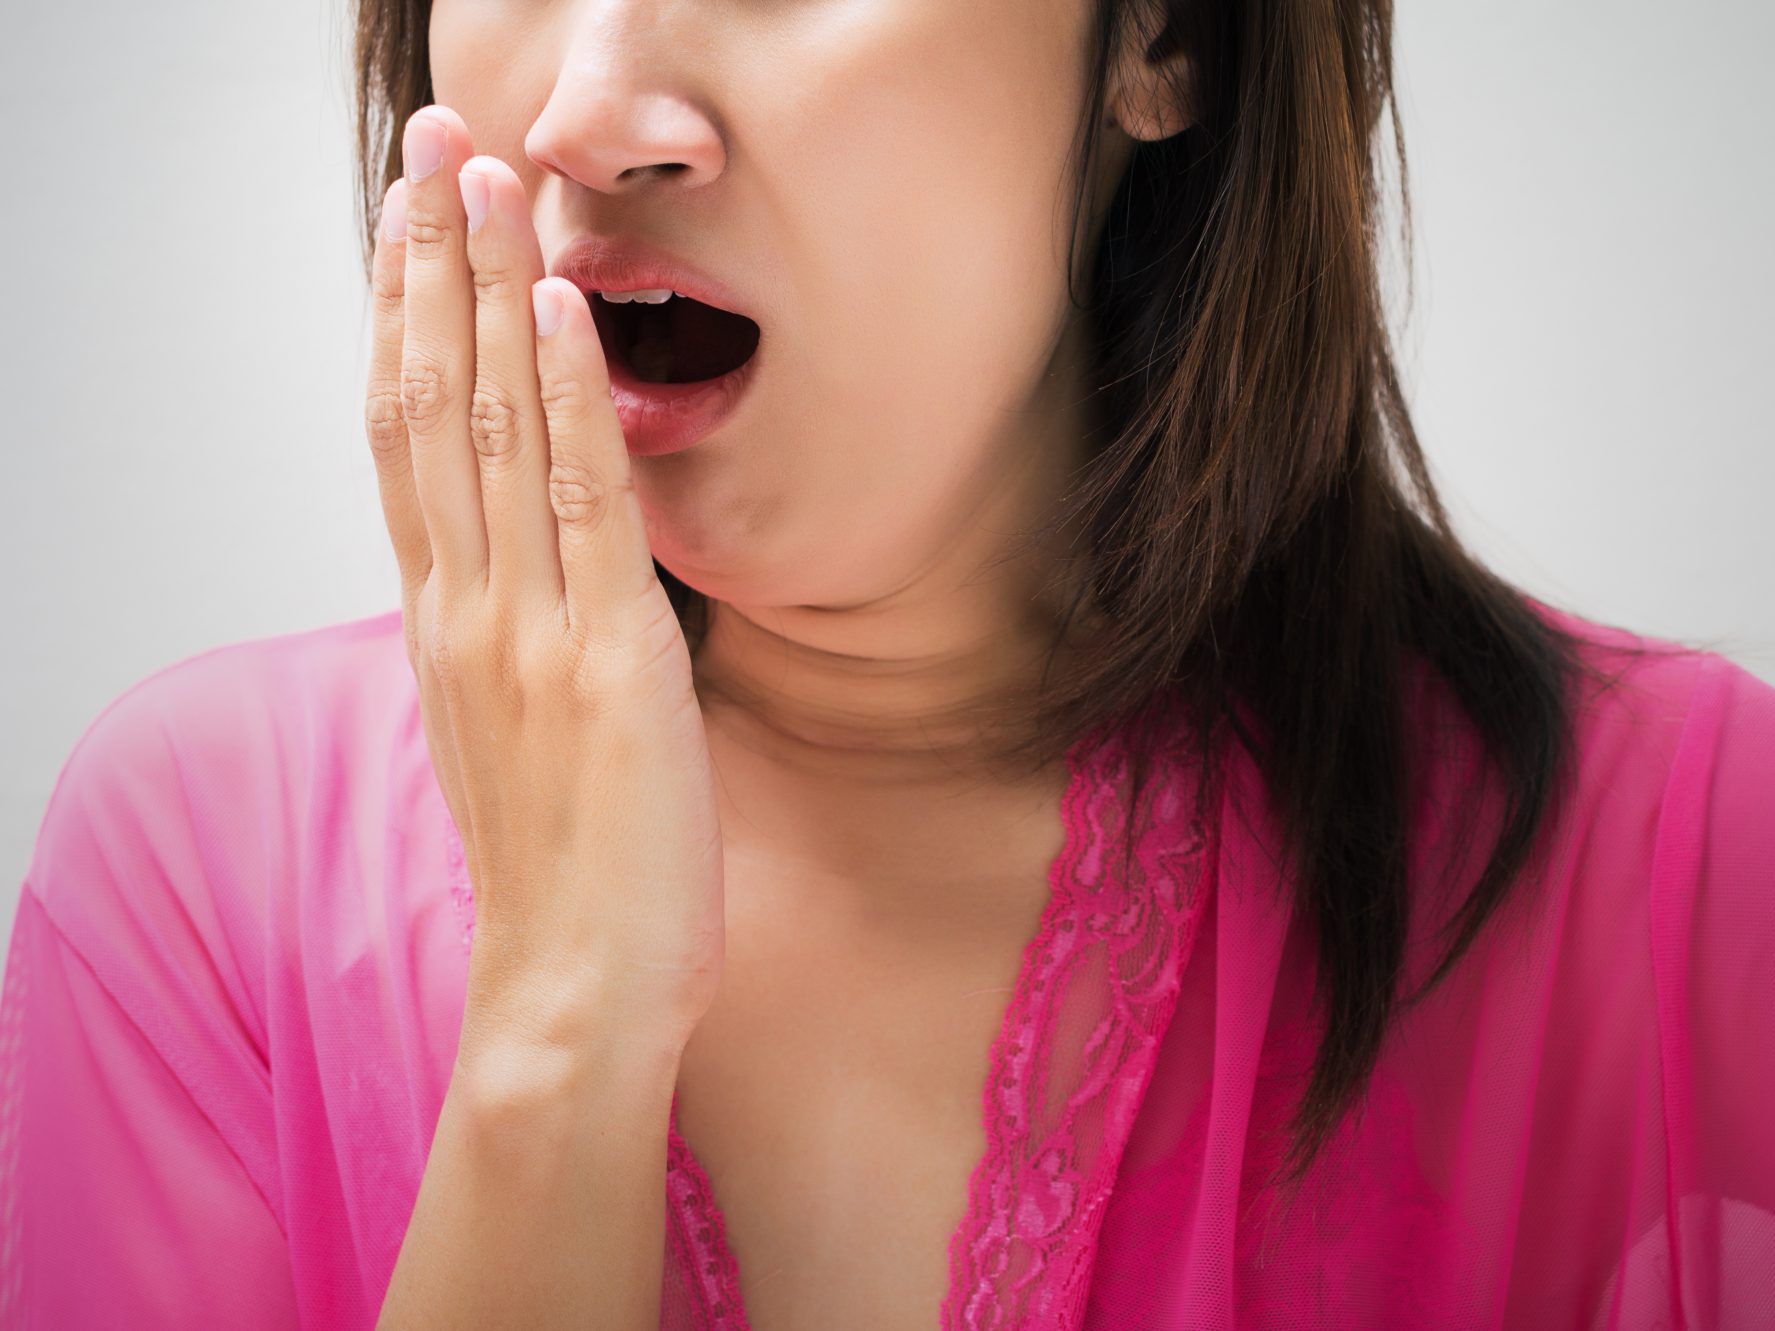 A woman wearing a pink cloth blowing her breath into her hand while smelling it